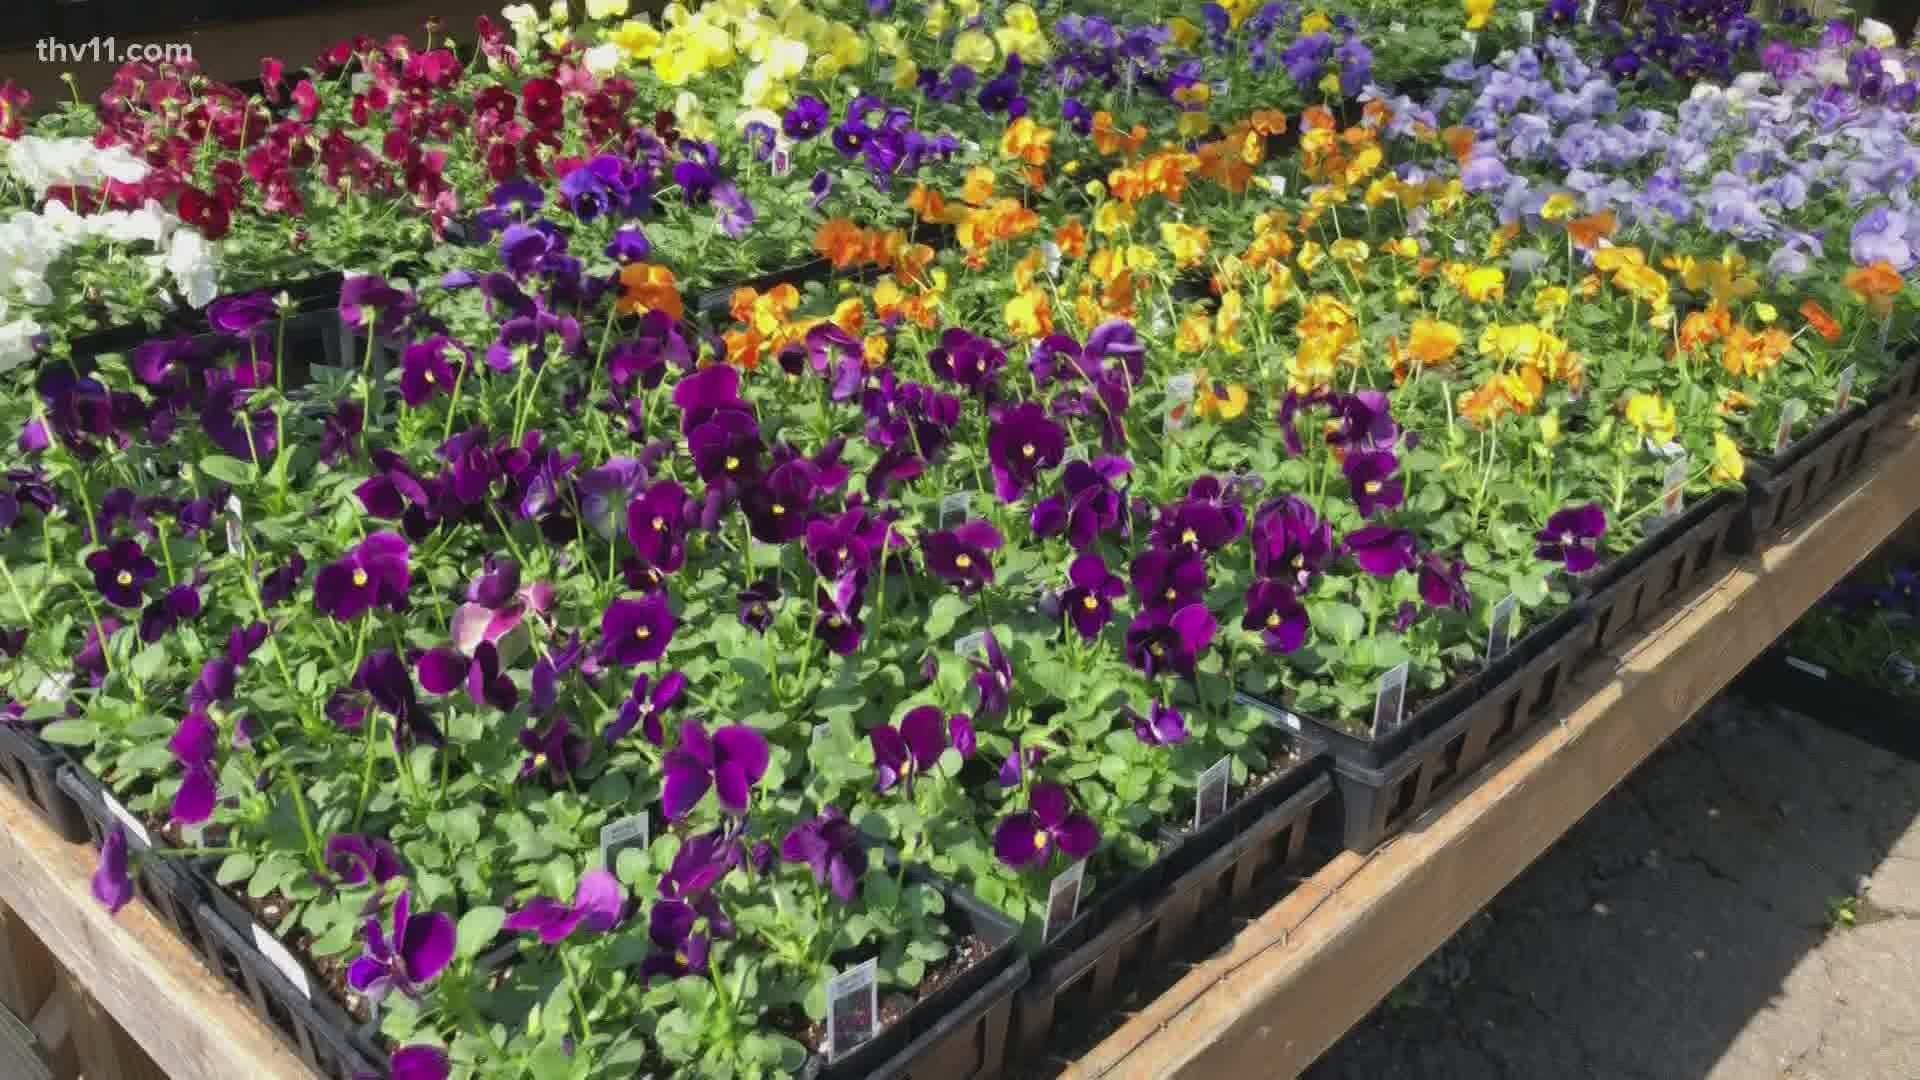 Chris H. Olsen with Plantopia shares his advice on what to plant this fall, such as pansies, snapdragons, cabbage and marigolds.